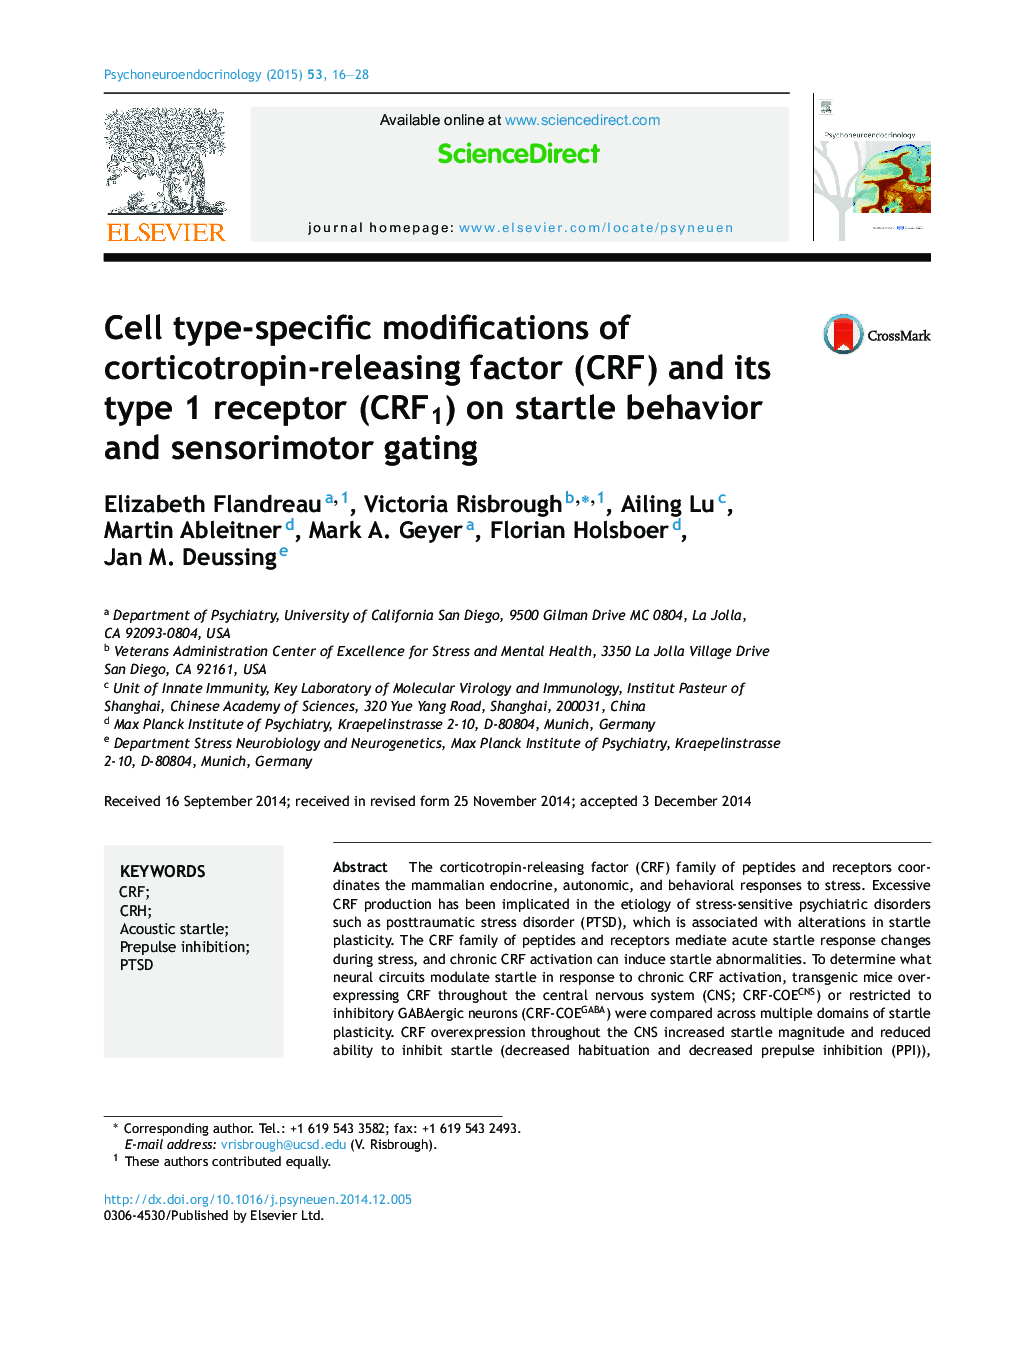 Cell type-specific modifications of corticotropin-releasing factor (CRF) and its type 1 receptor (CRF1) on startle behavior and sensorimotor gating